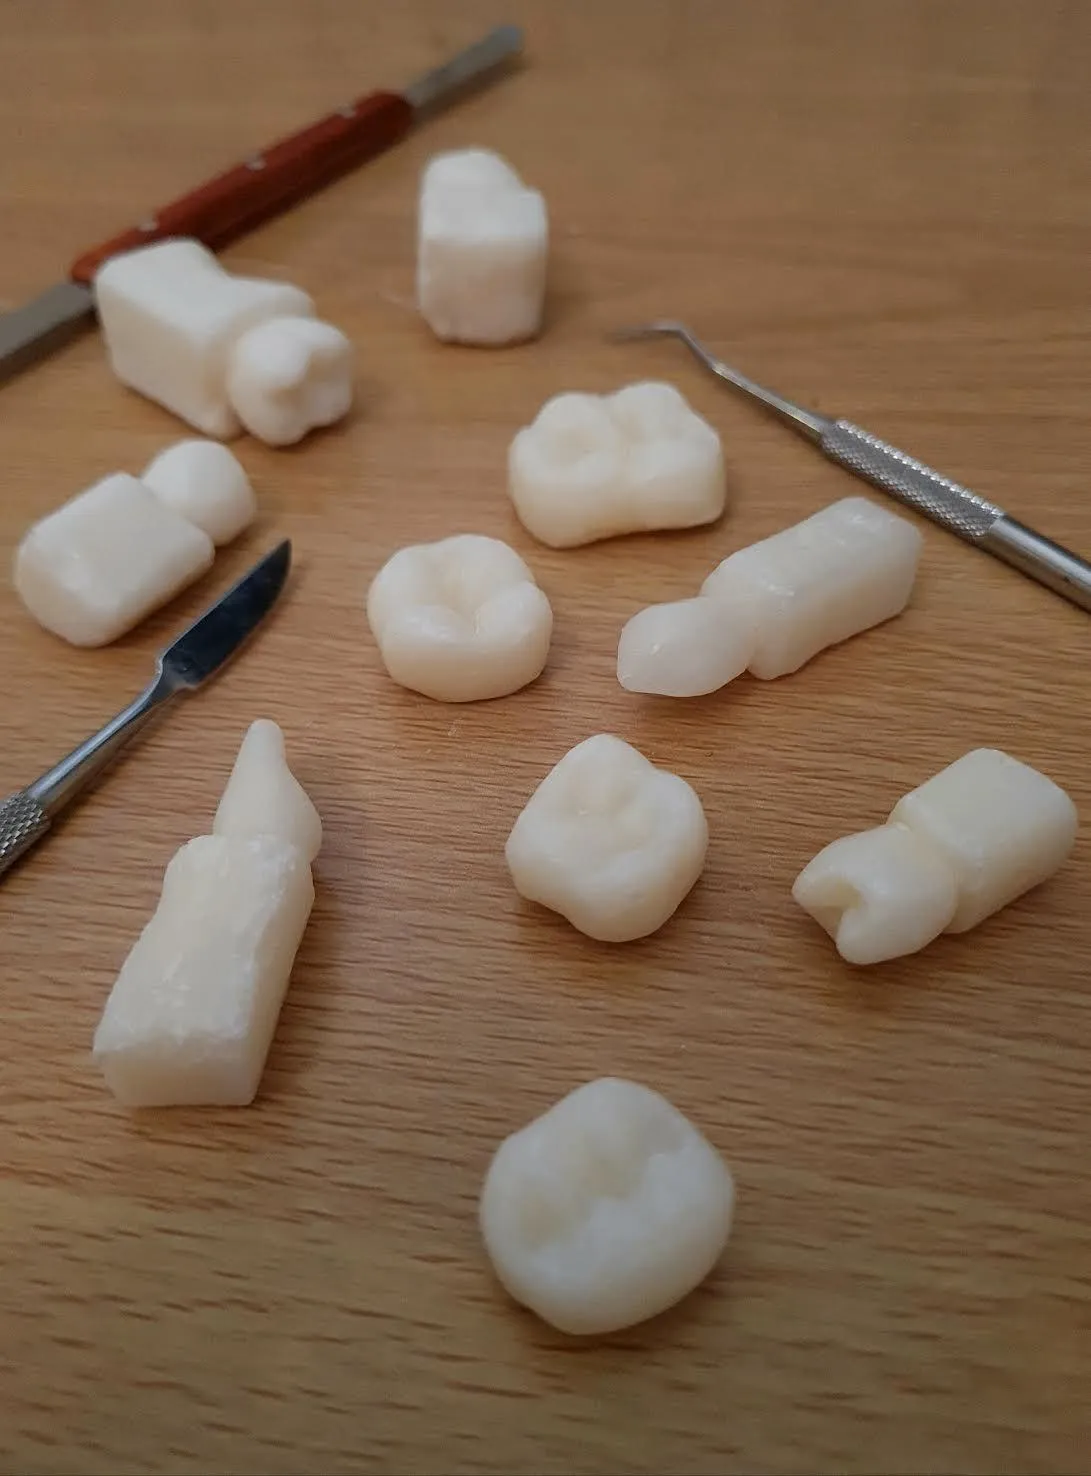 Teeth carvings out of soap